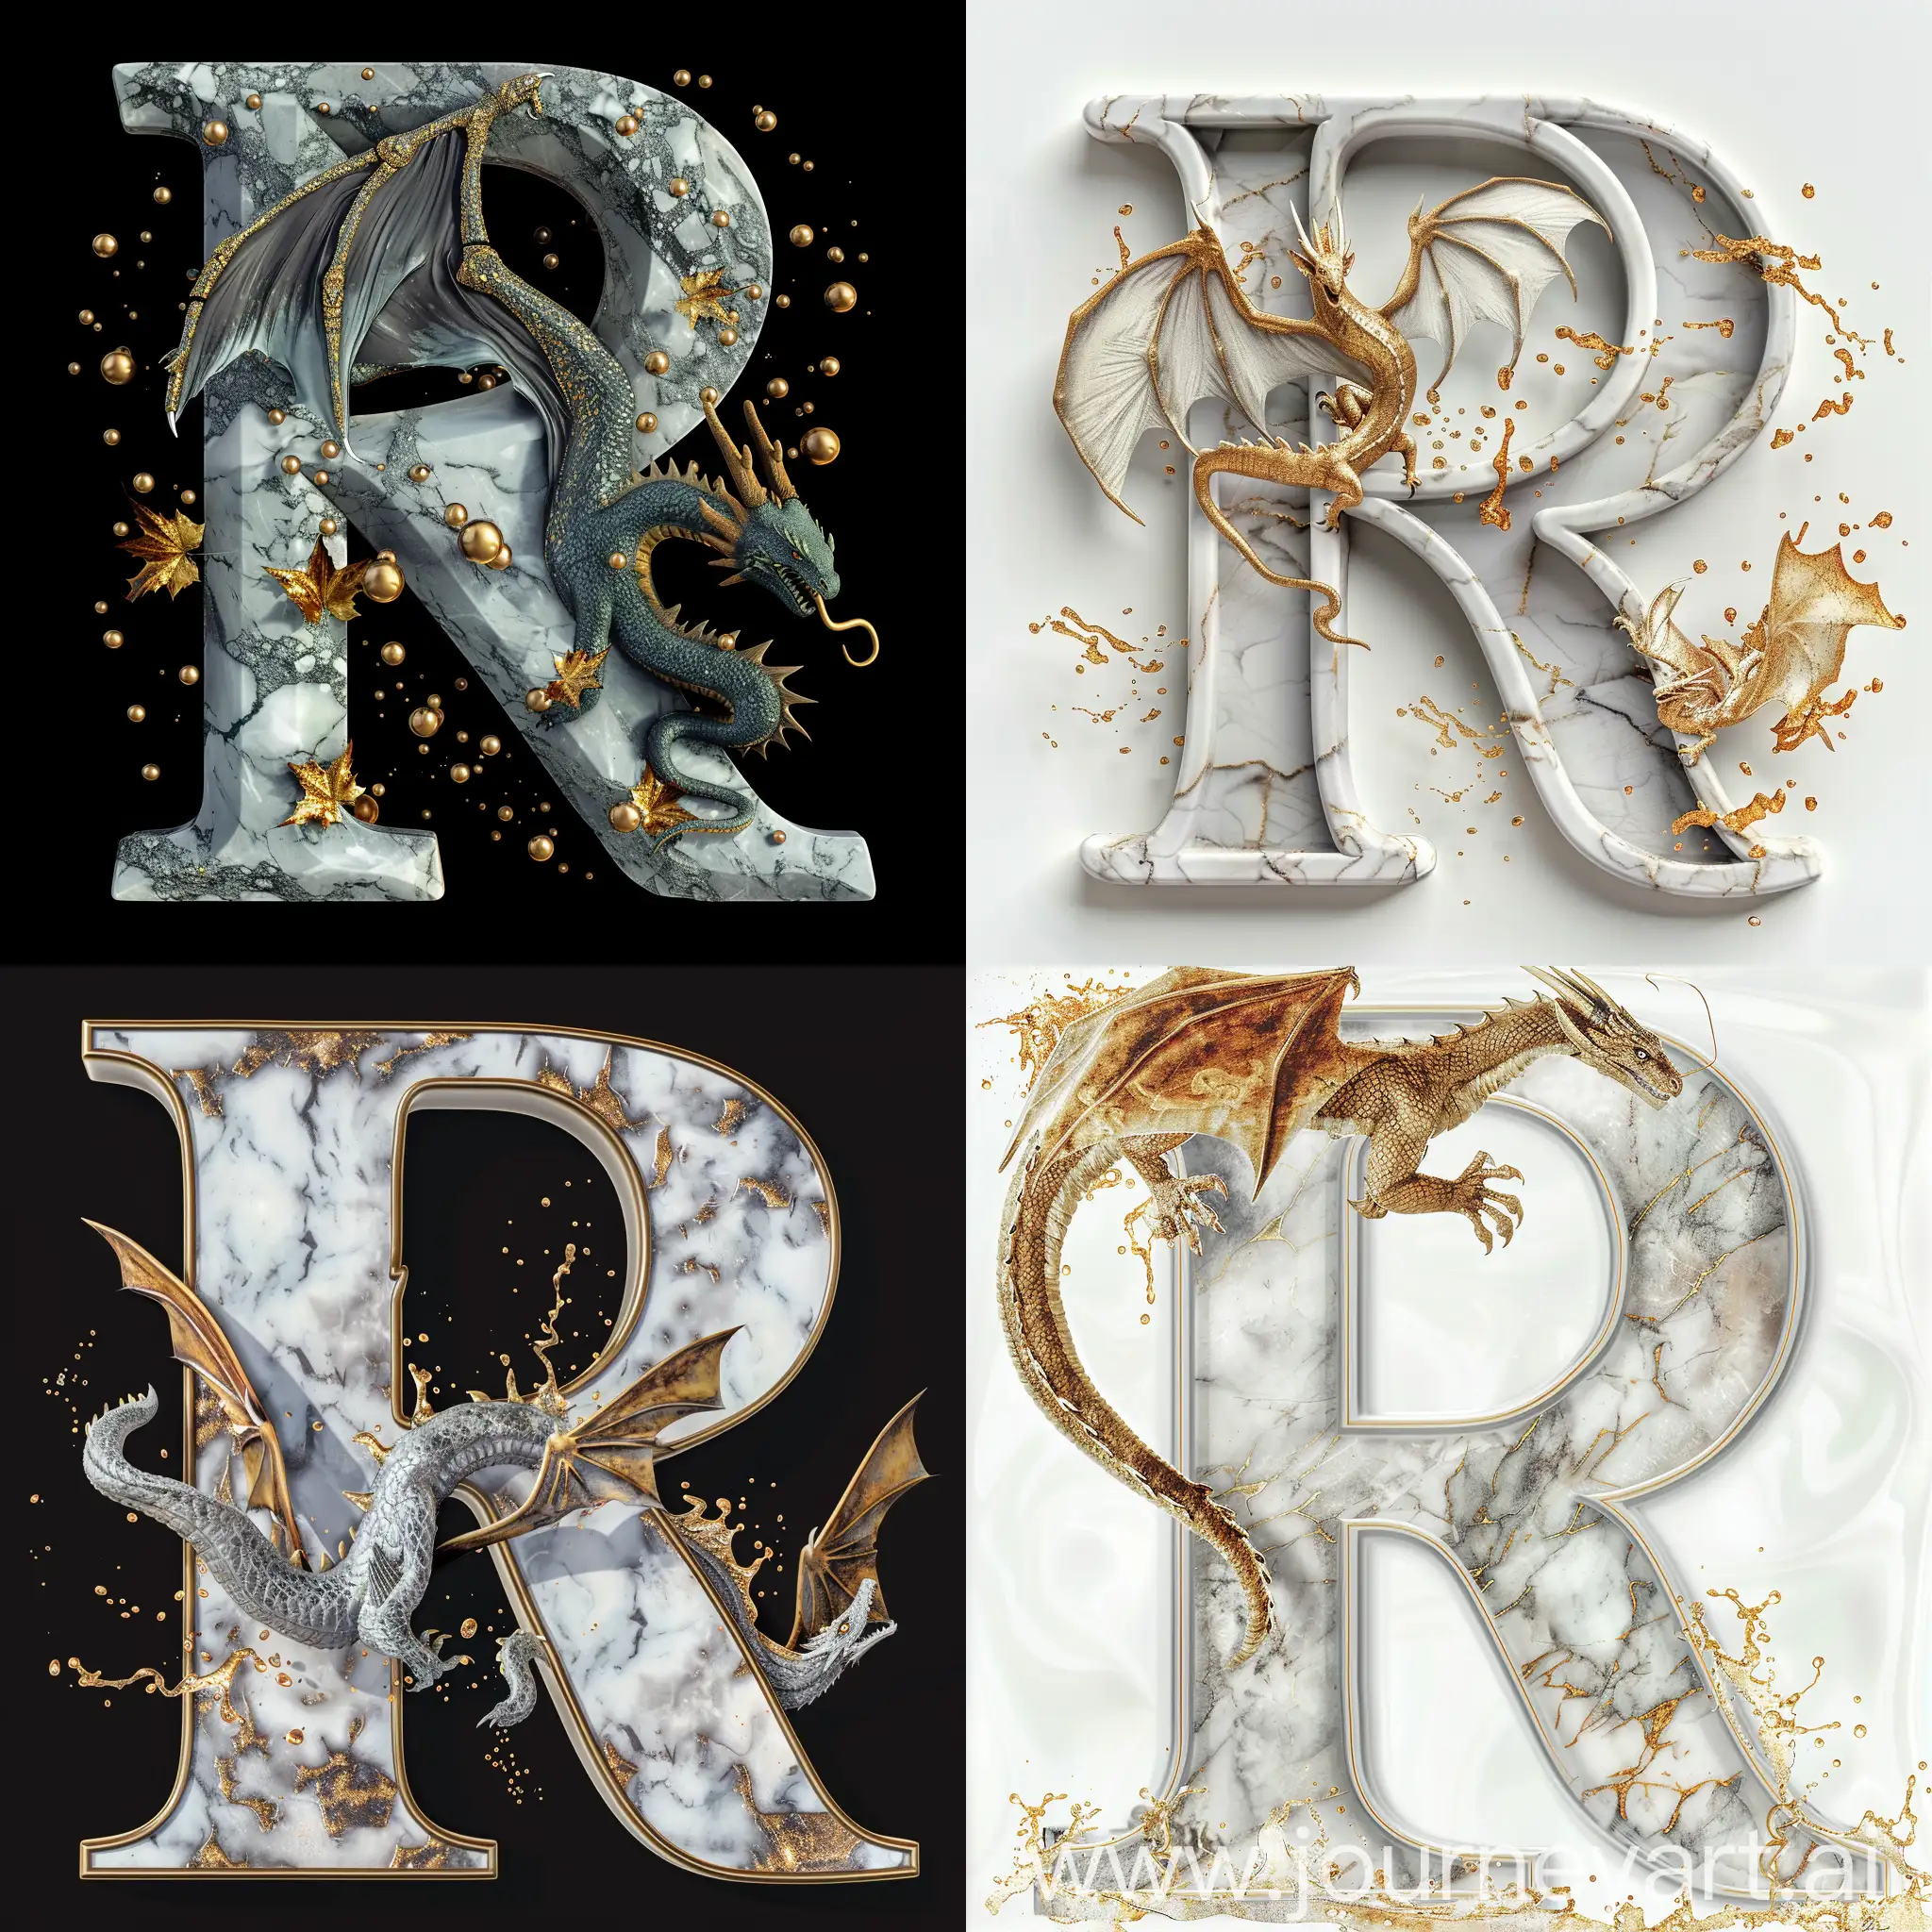 A high detail letter R splash art ultra realistic with elvish style dragon and marble ultra quality texture, with gold accents and details